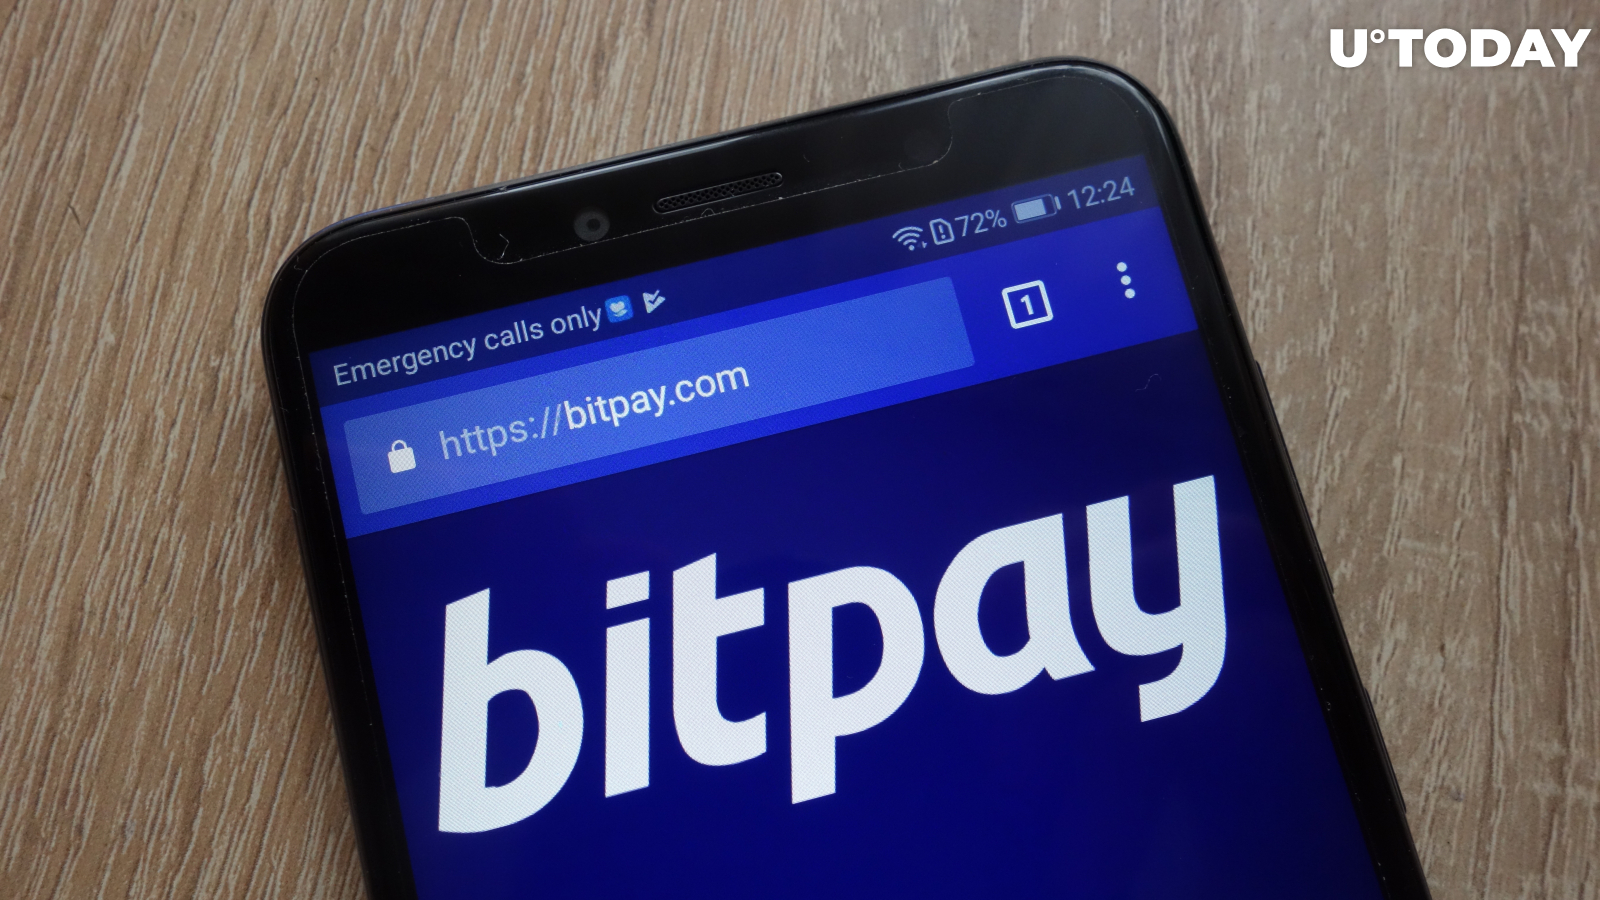 Shiba Inu, Dogecoin and Other Coins Can Now Be Bought with Zero Fees in BitPay Wallet App 